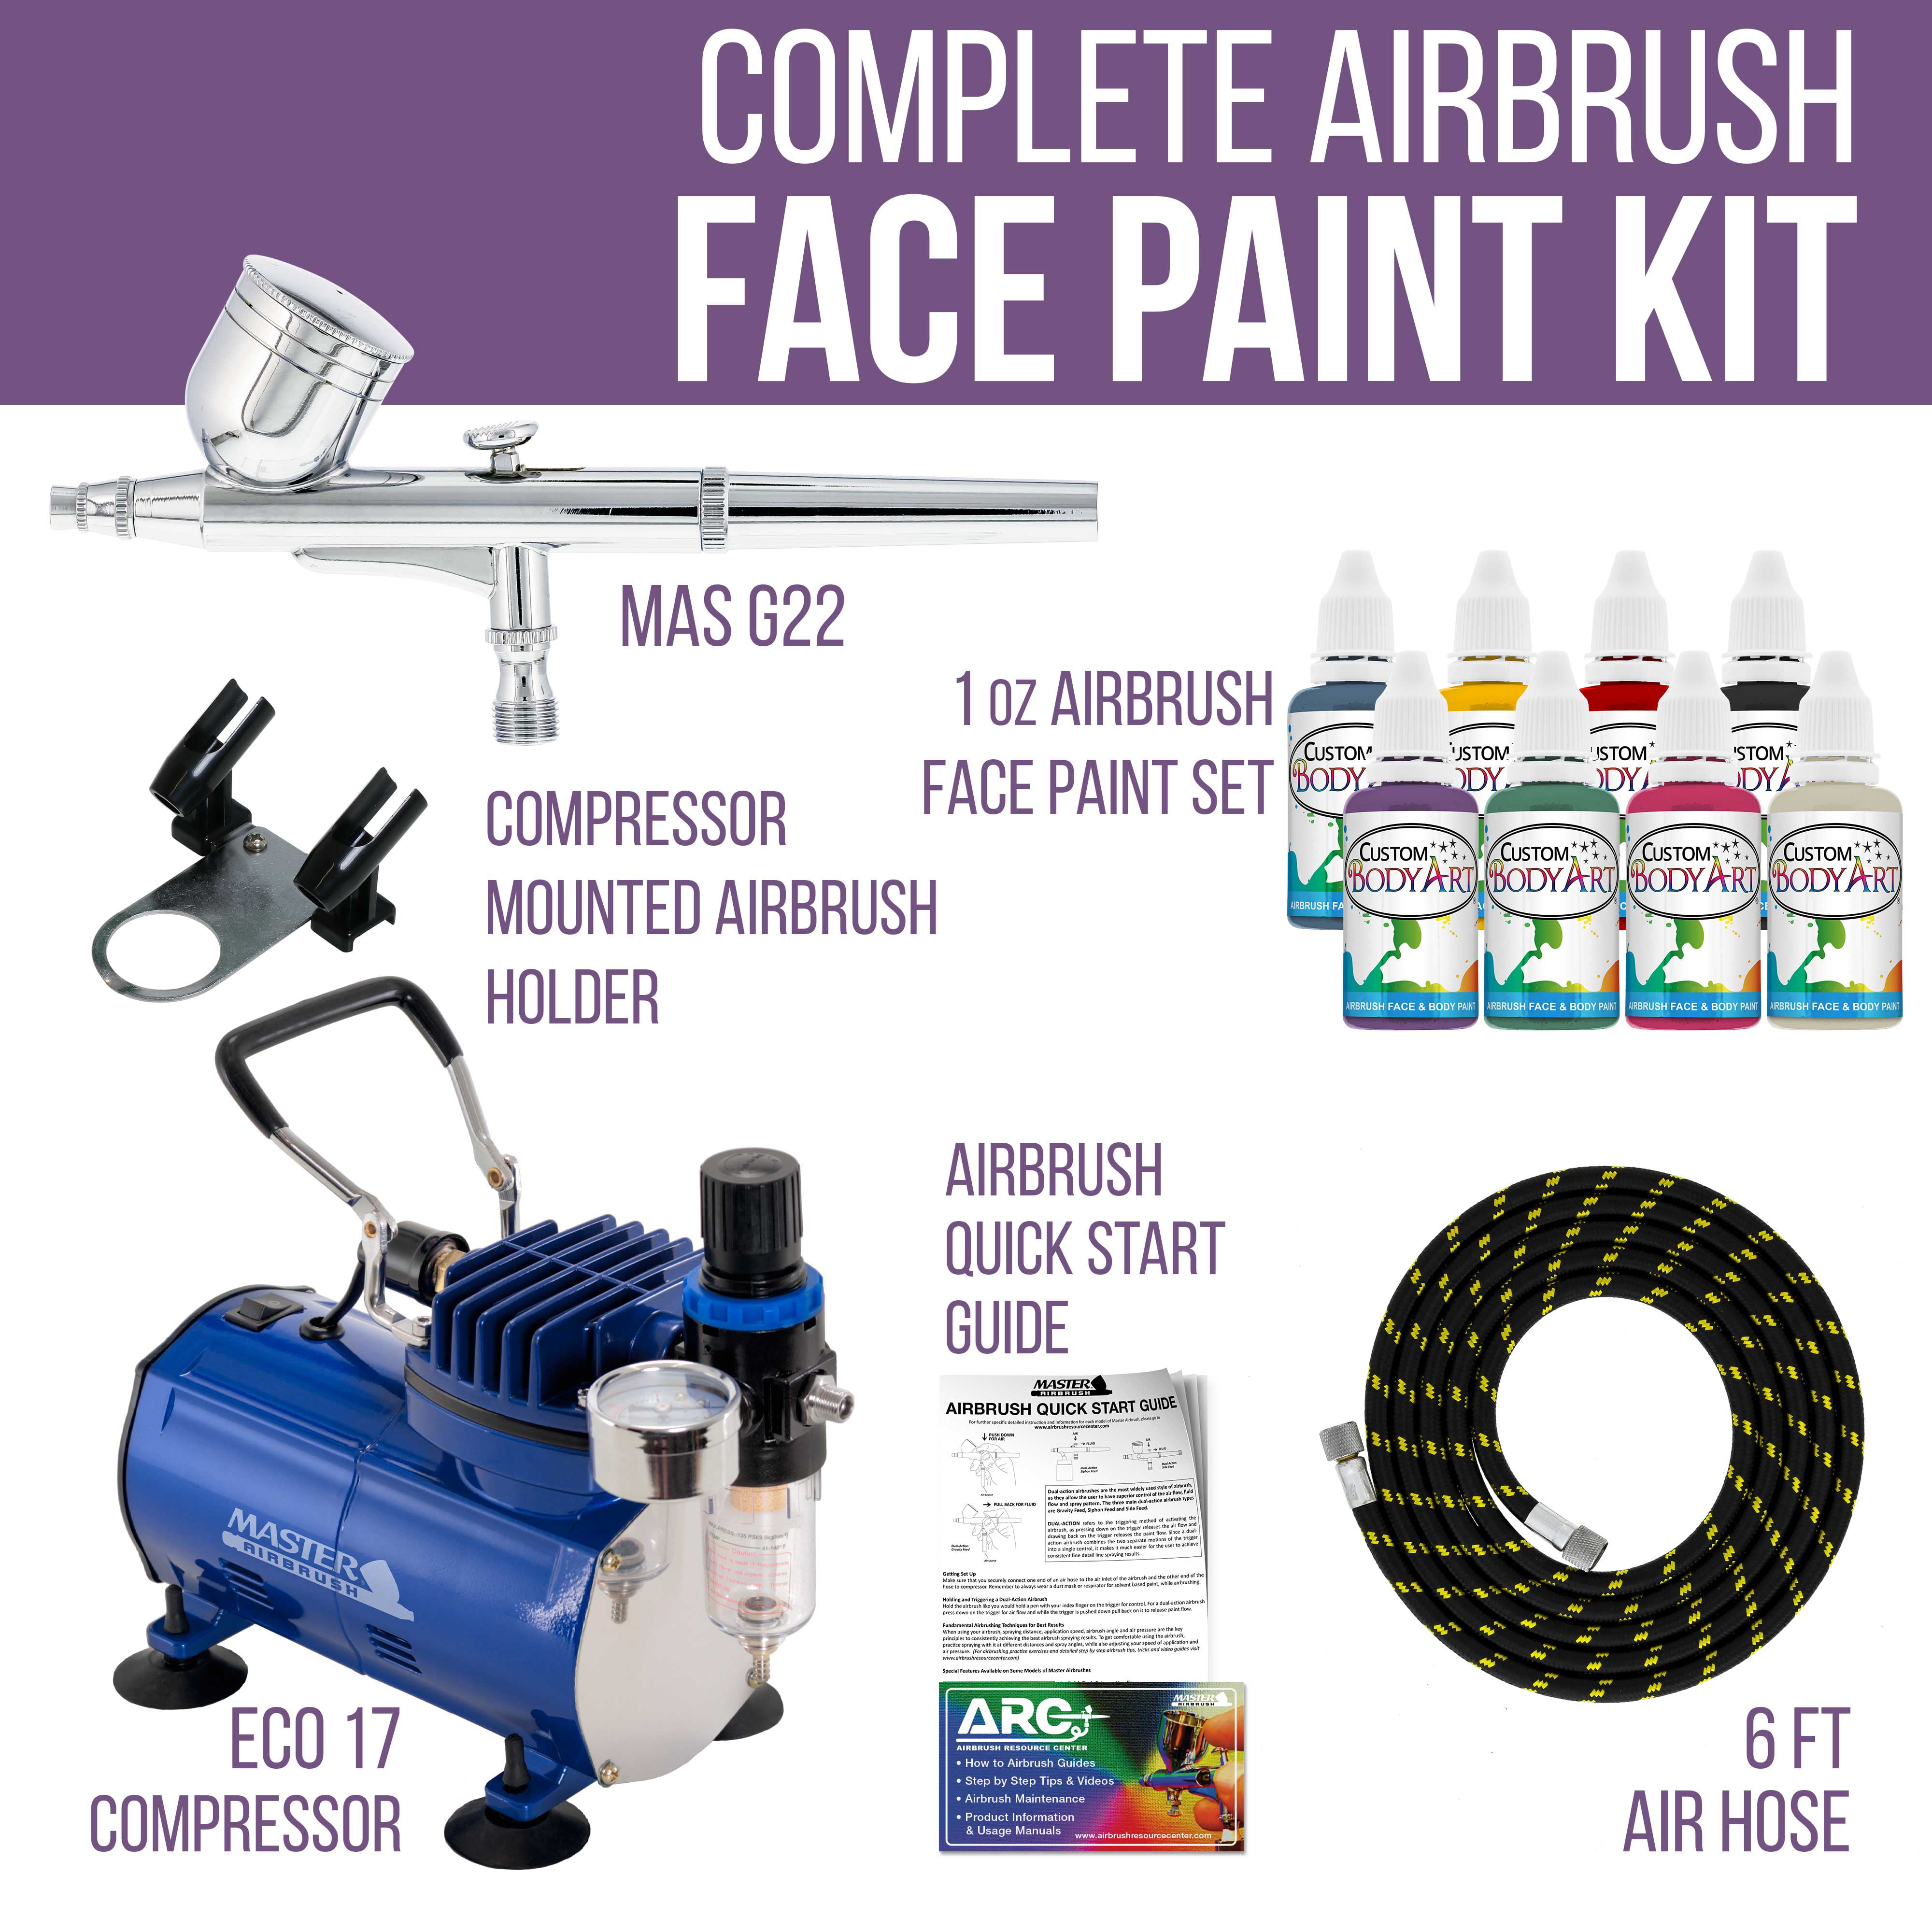 Airbrush Paint Kits for sale in Memphis, Tennessee